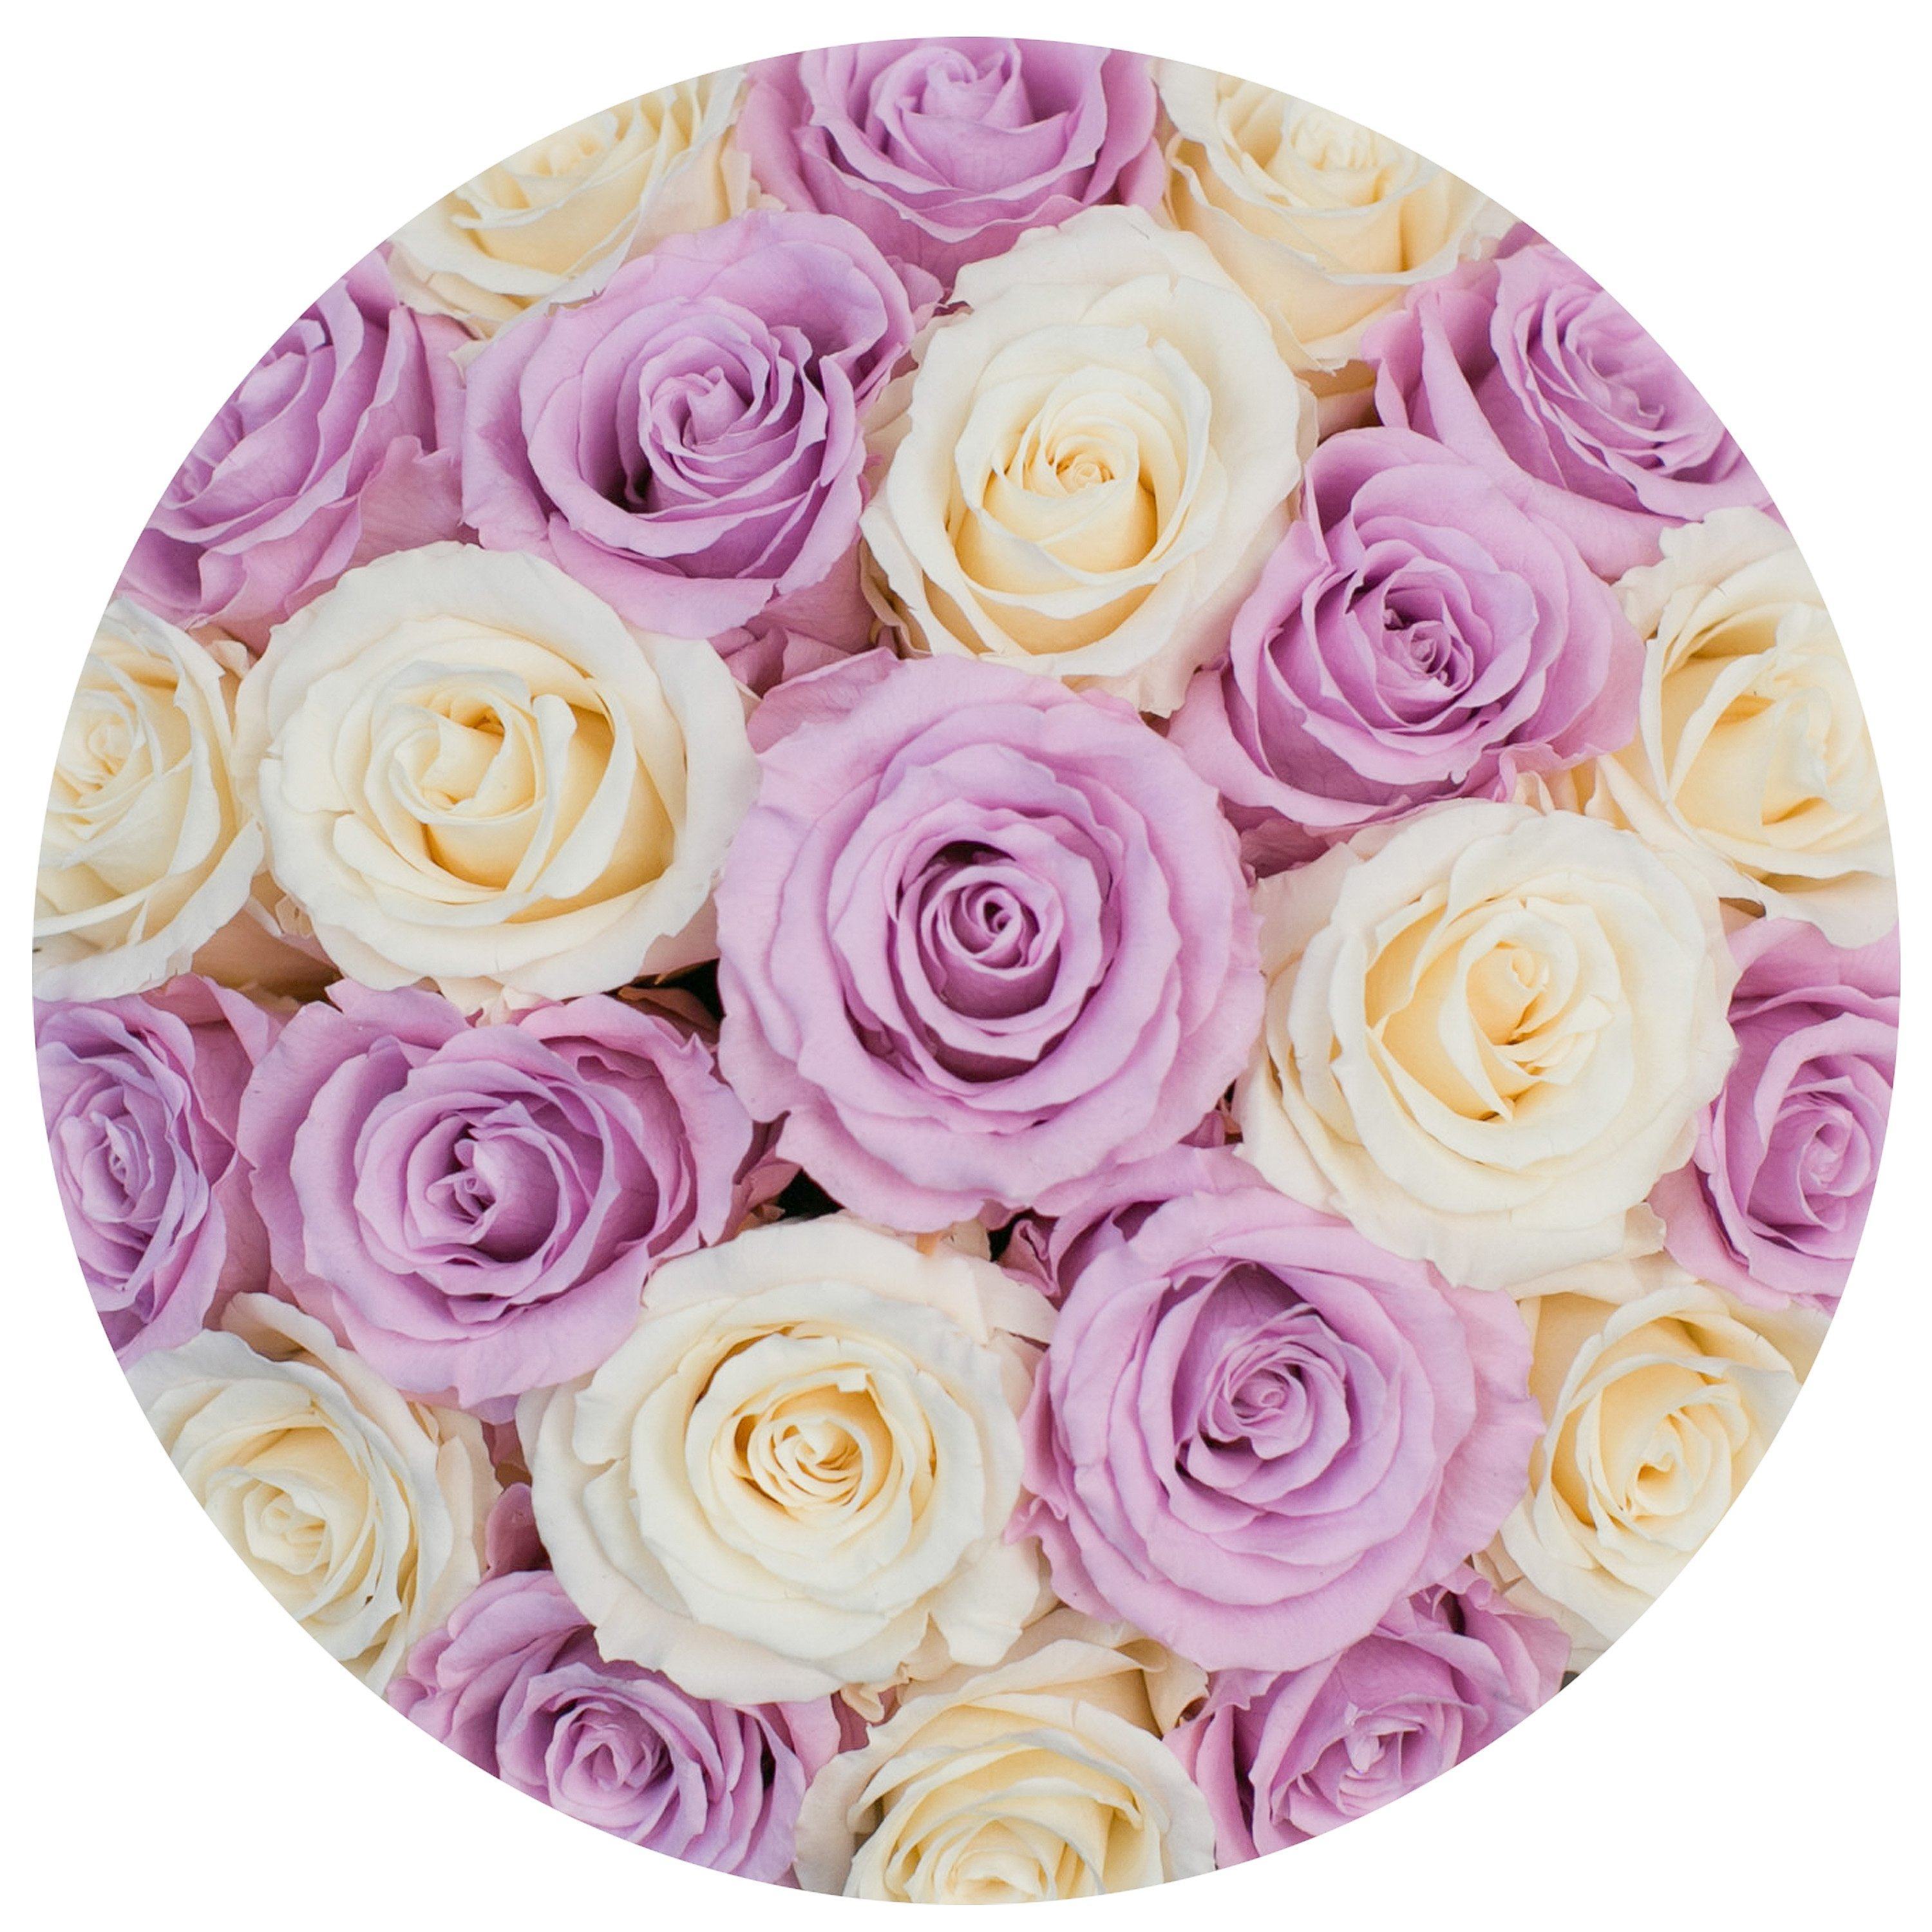 classic round box - hot-pink suede box - ivory/pink roses ( dome ) pink eternity roses - the million roses